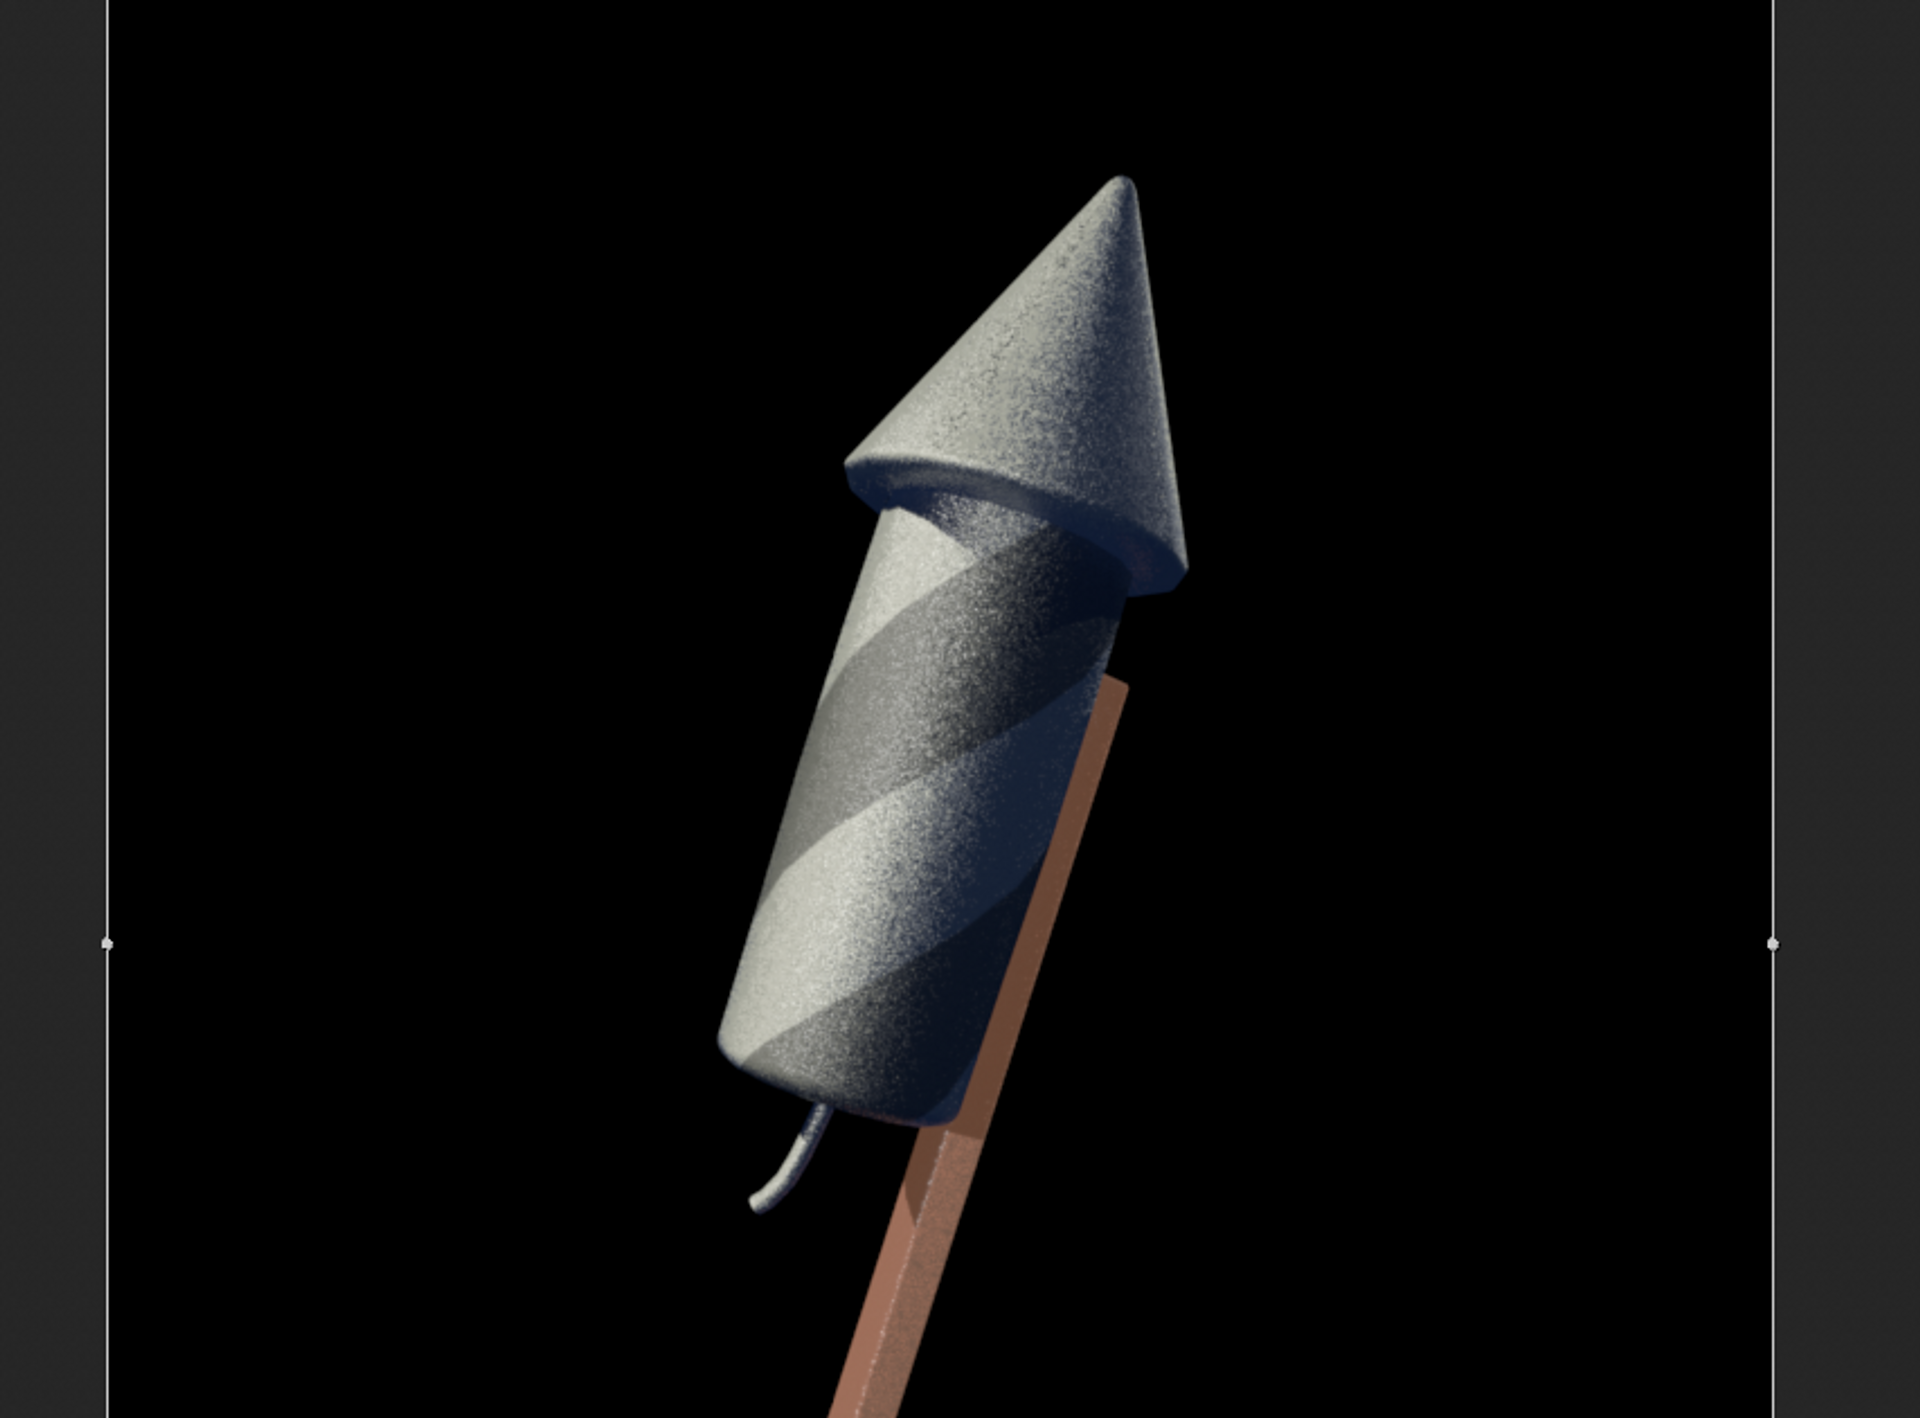 Raw render of stripe texture applied to the rocket